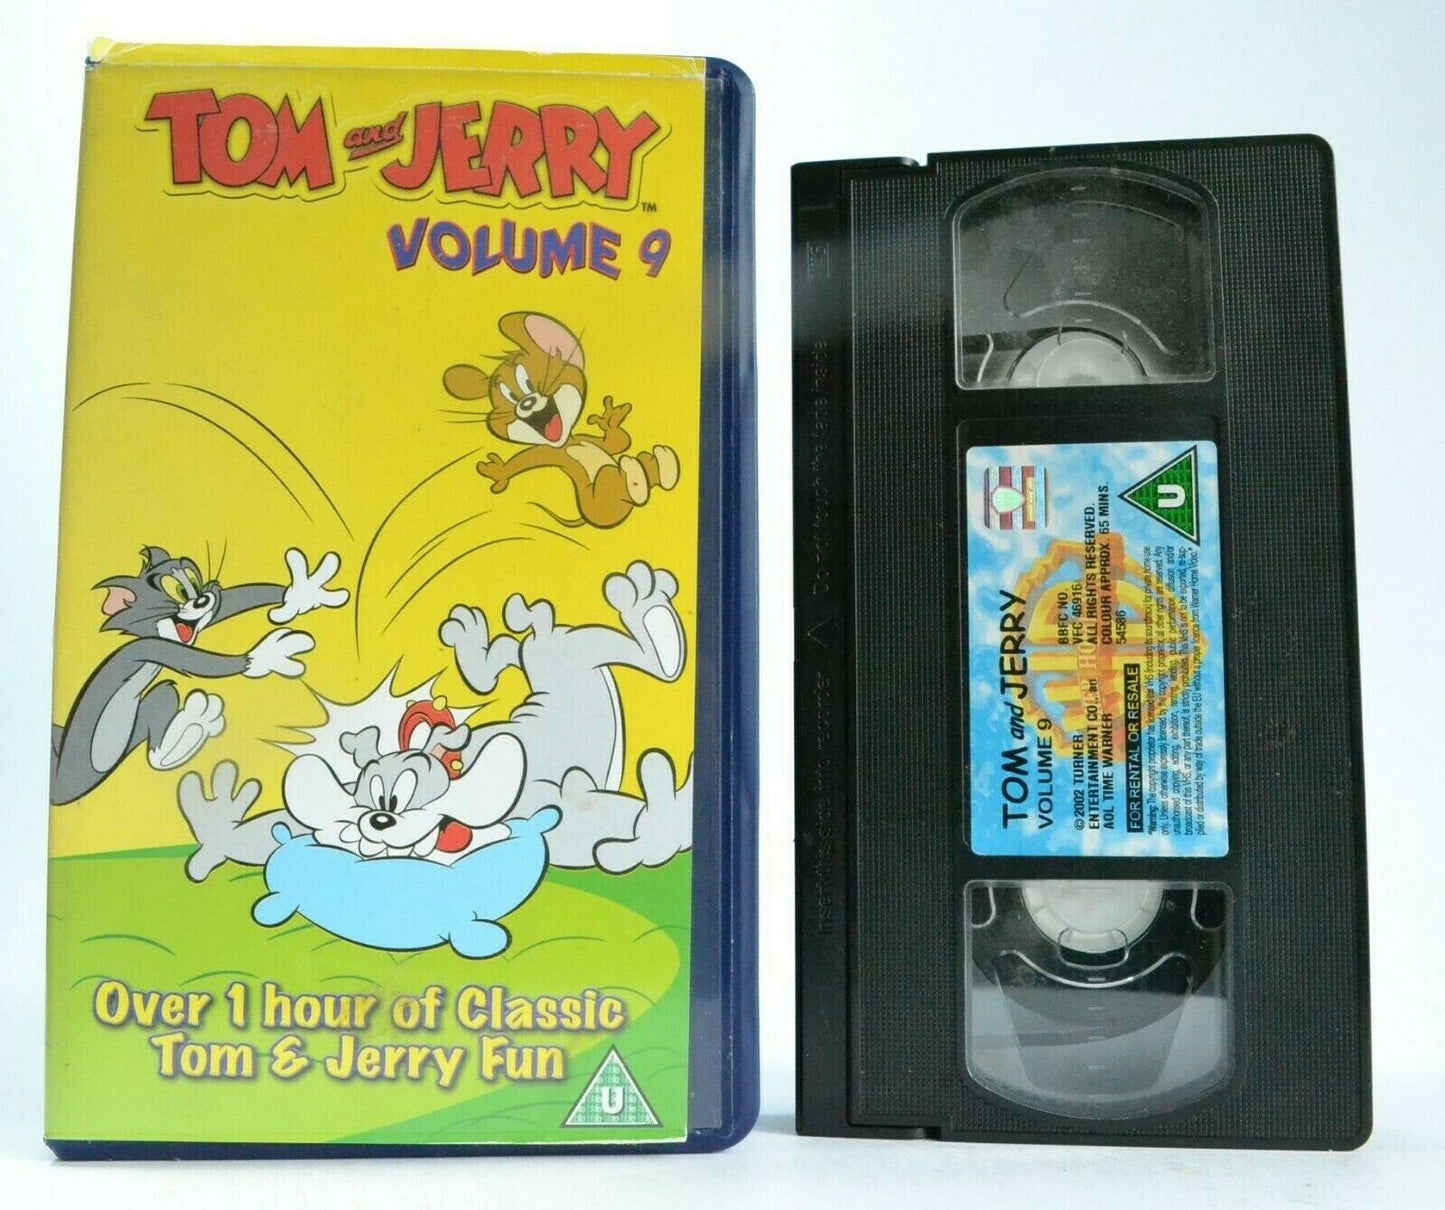 Tom And Jerry (Vol.9): 'Tops With Pops' - Animated Adventures - Children's - VHS-